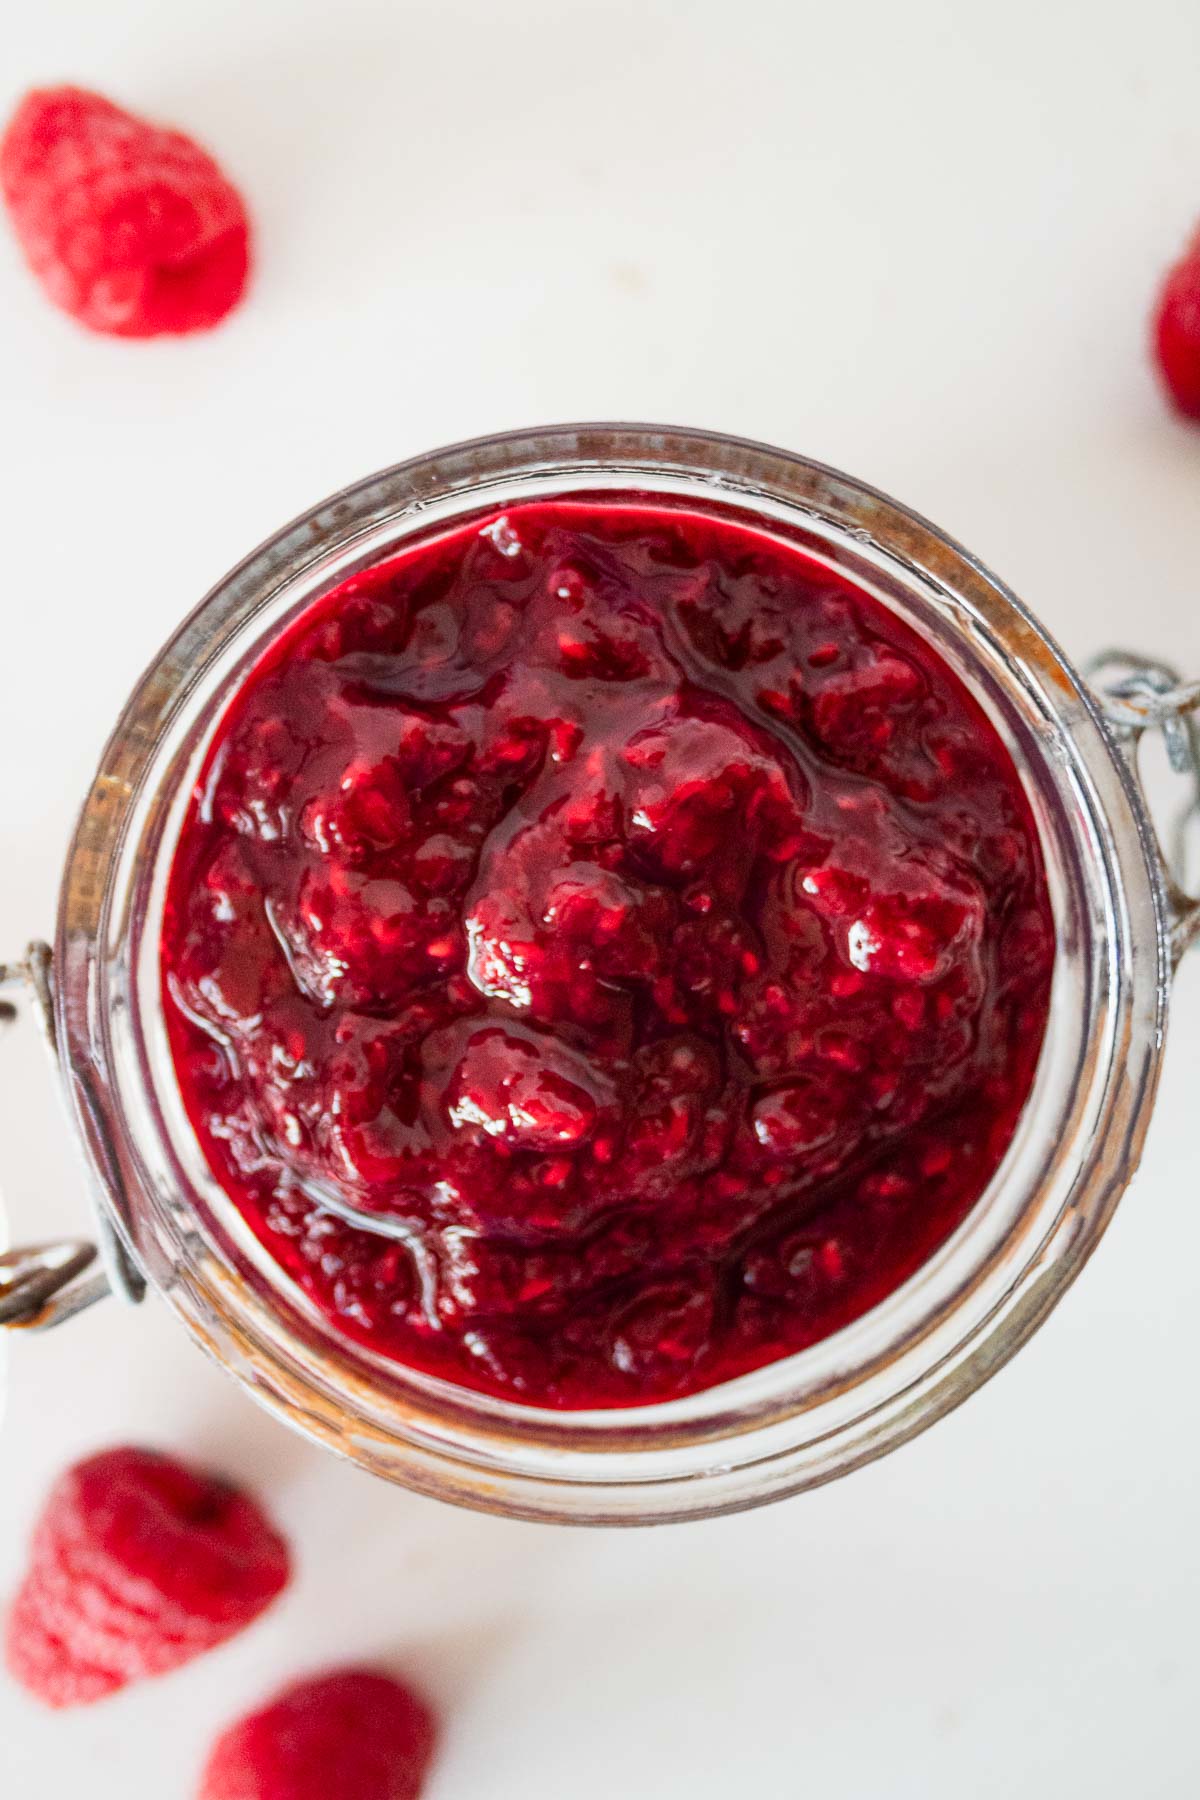 Easy sugar free jam for diabetics in a jar with raspberries in the background